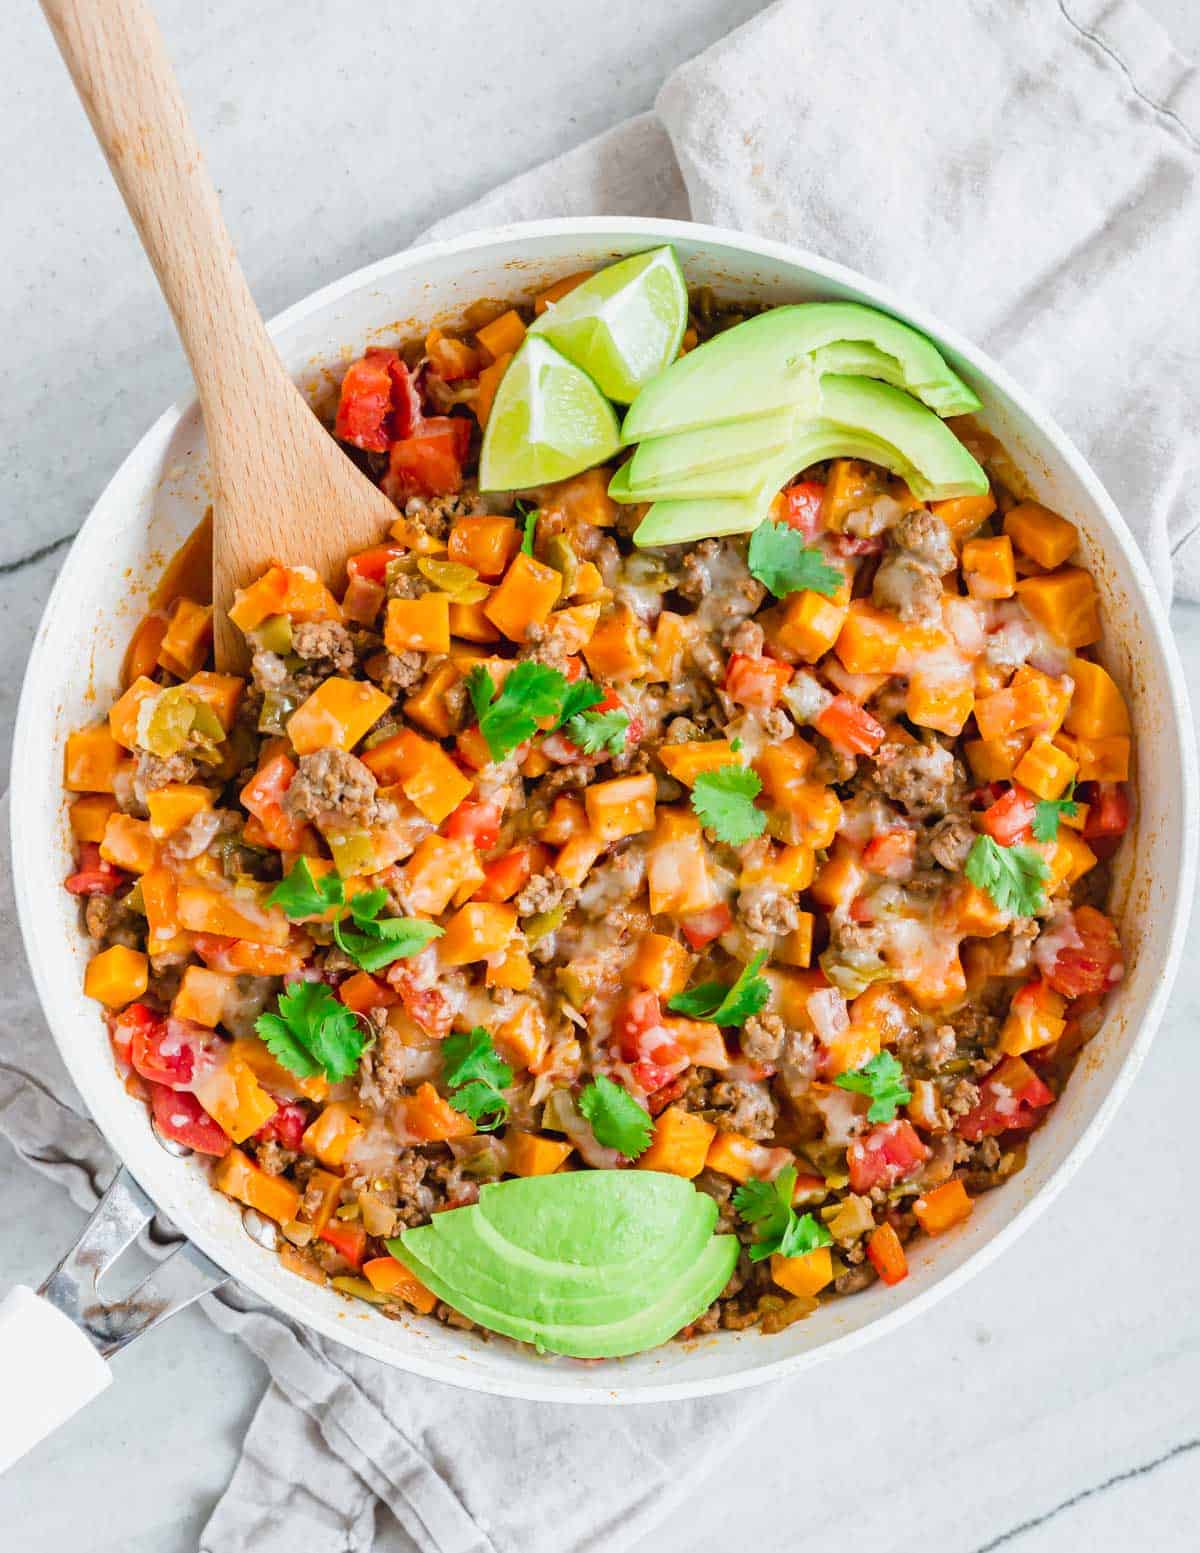 Overhead shot of Tex-Mex flavored ground beef and sweet potato skillet with a wood serving spatula and sliced avocado and lime.